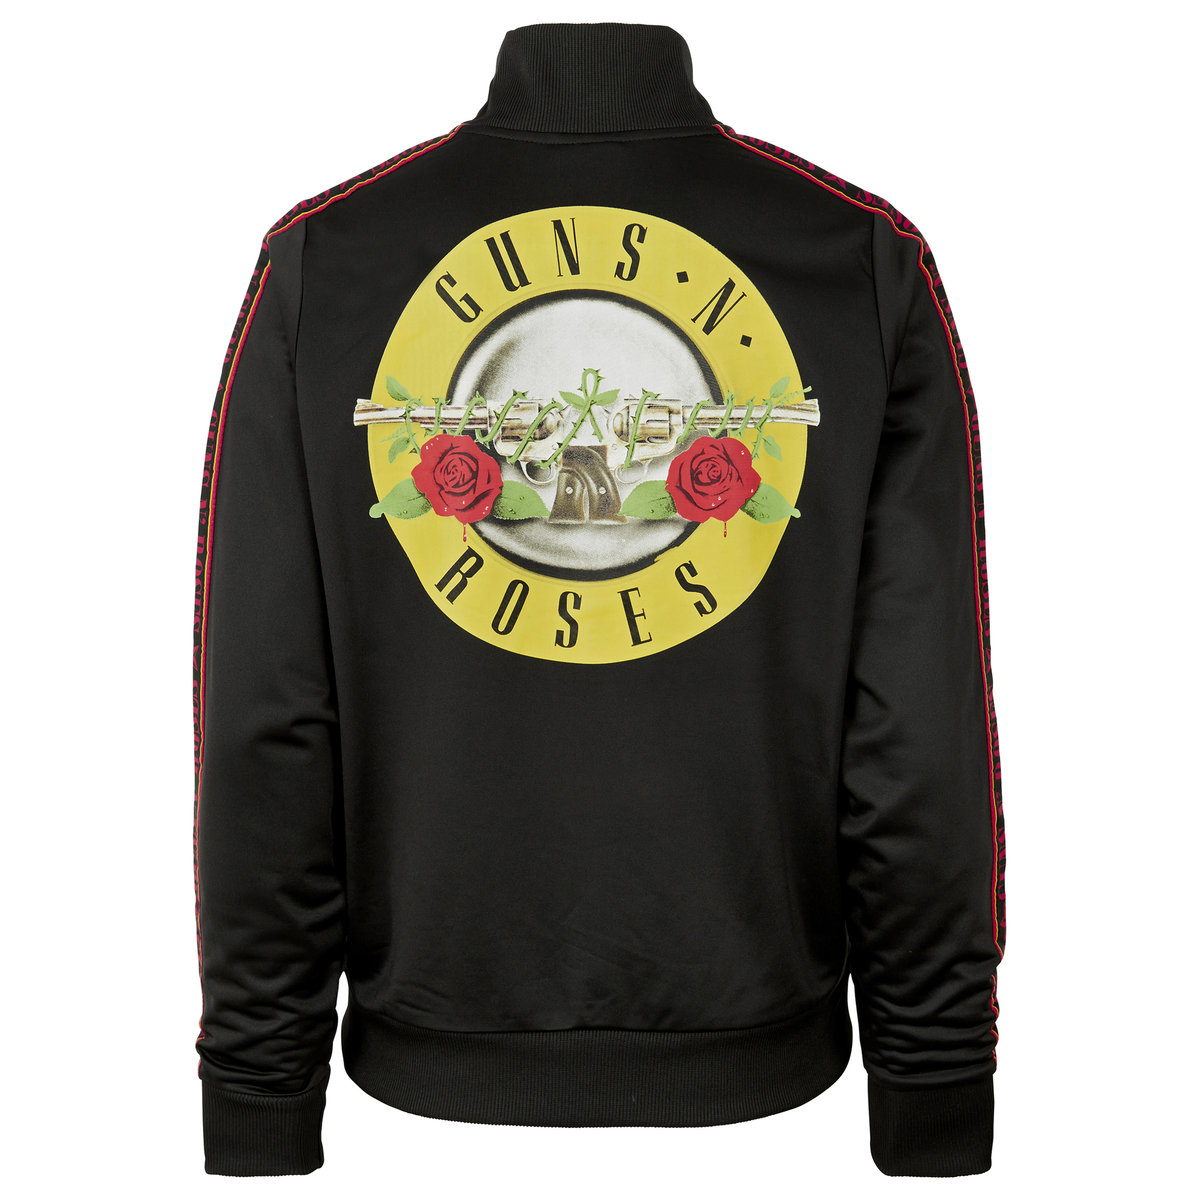 GNR Ladies Taped Tricot Track Top